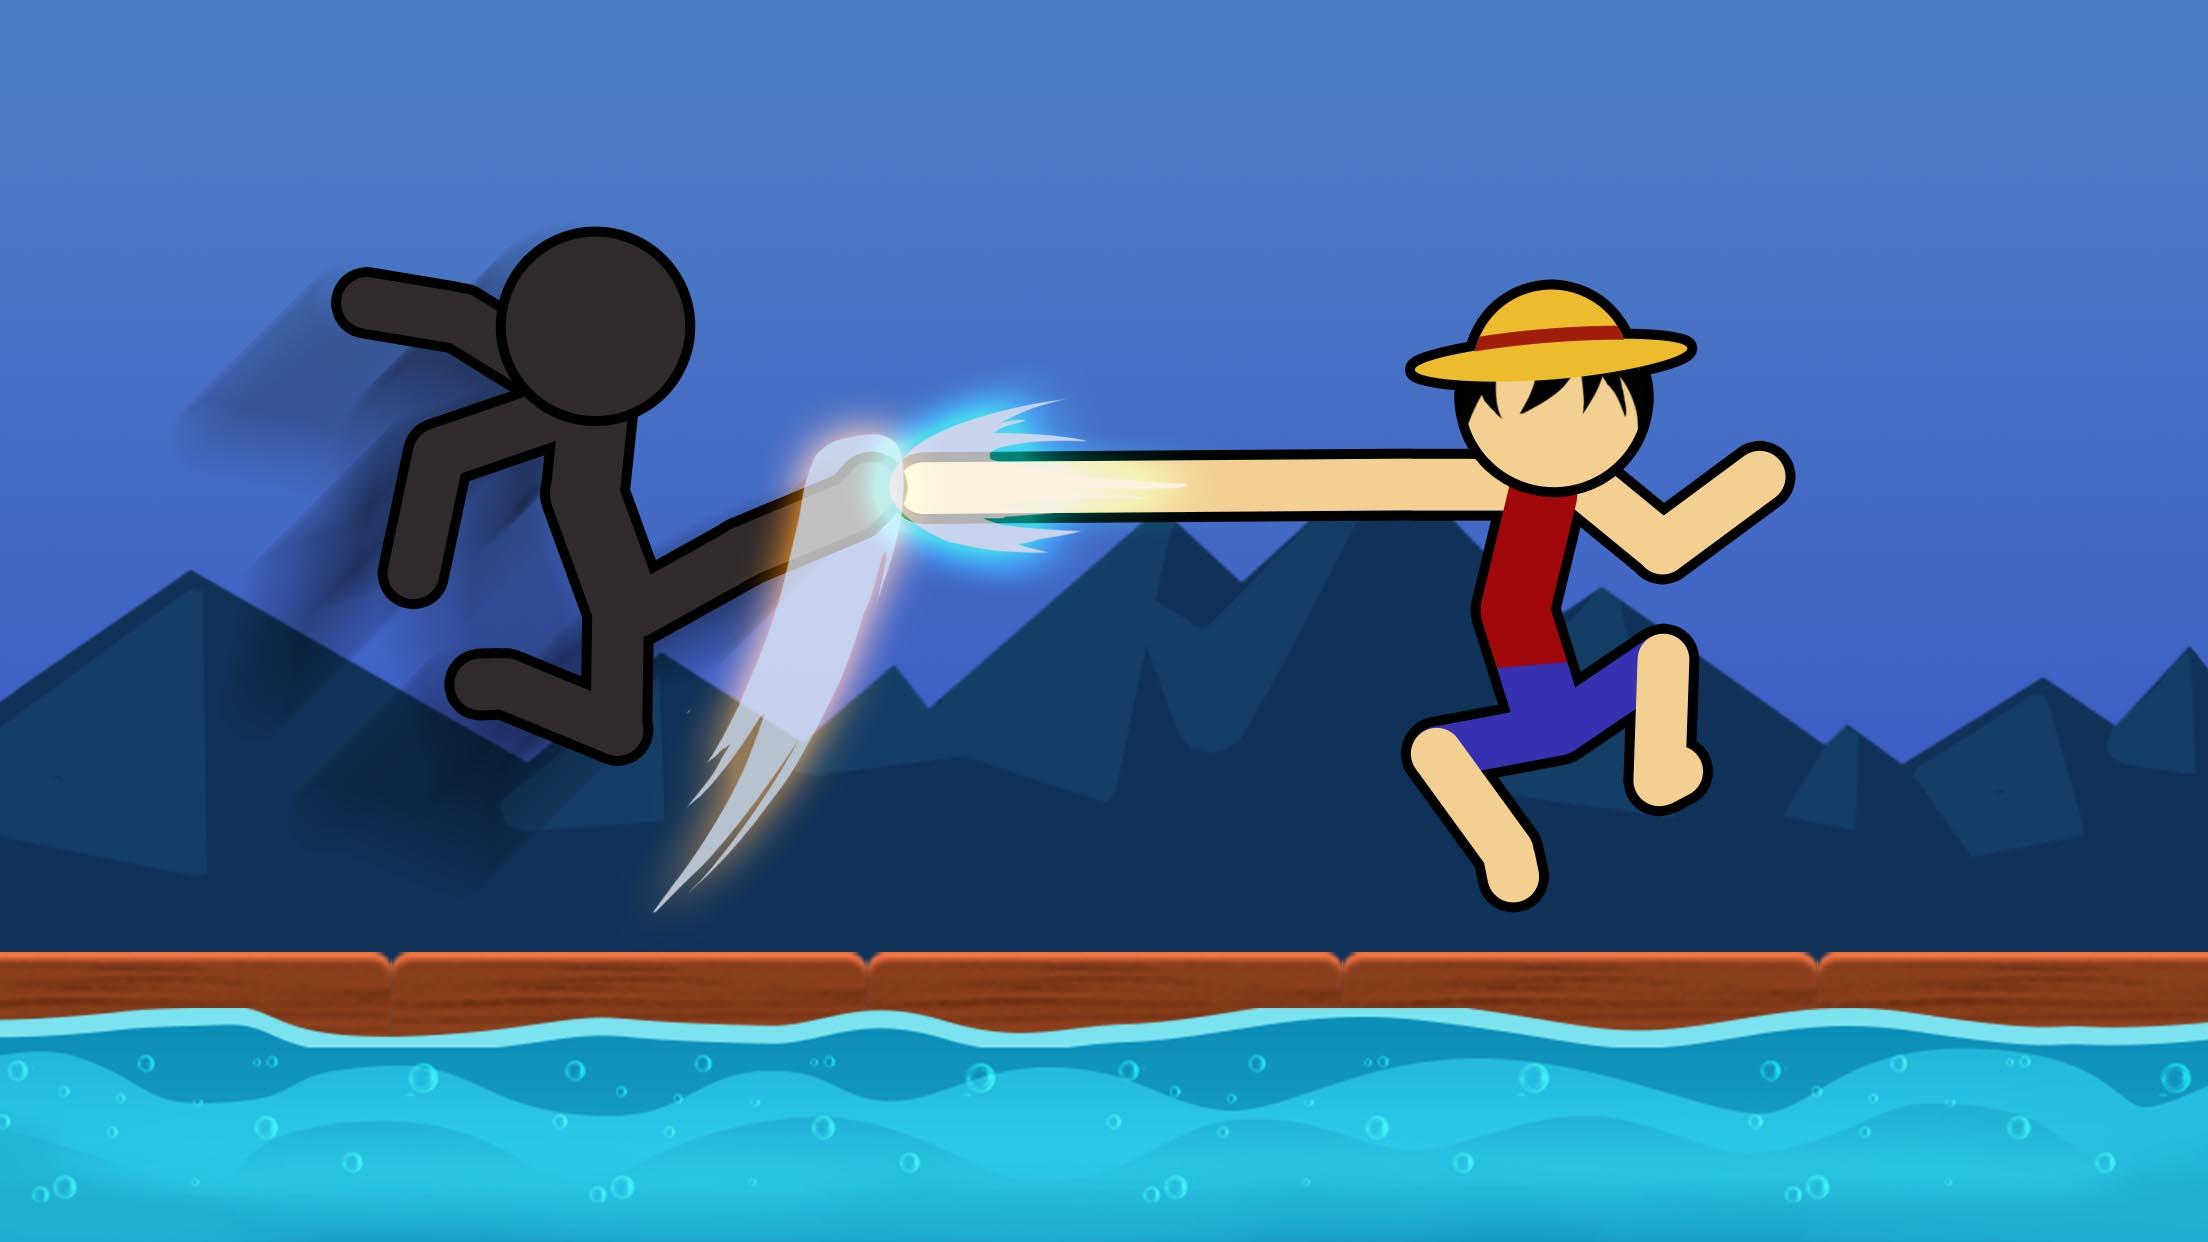 The Ultimate Stickman Fighting Game Experience - Free Play & No Download